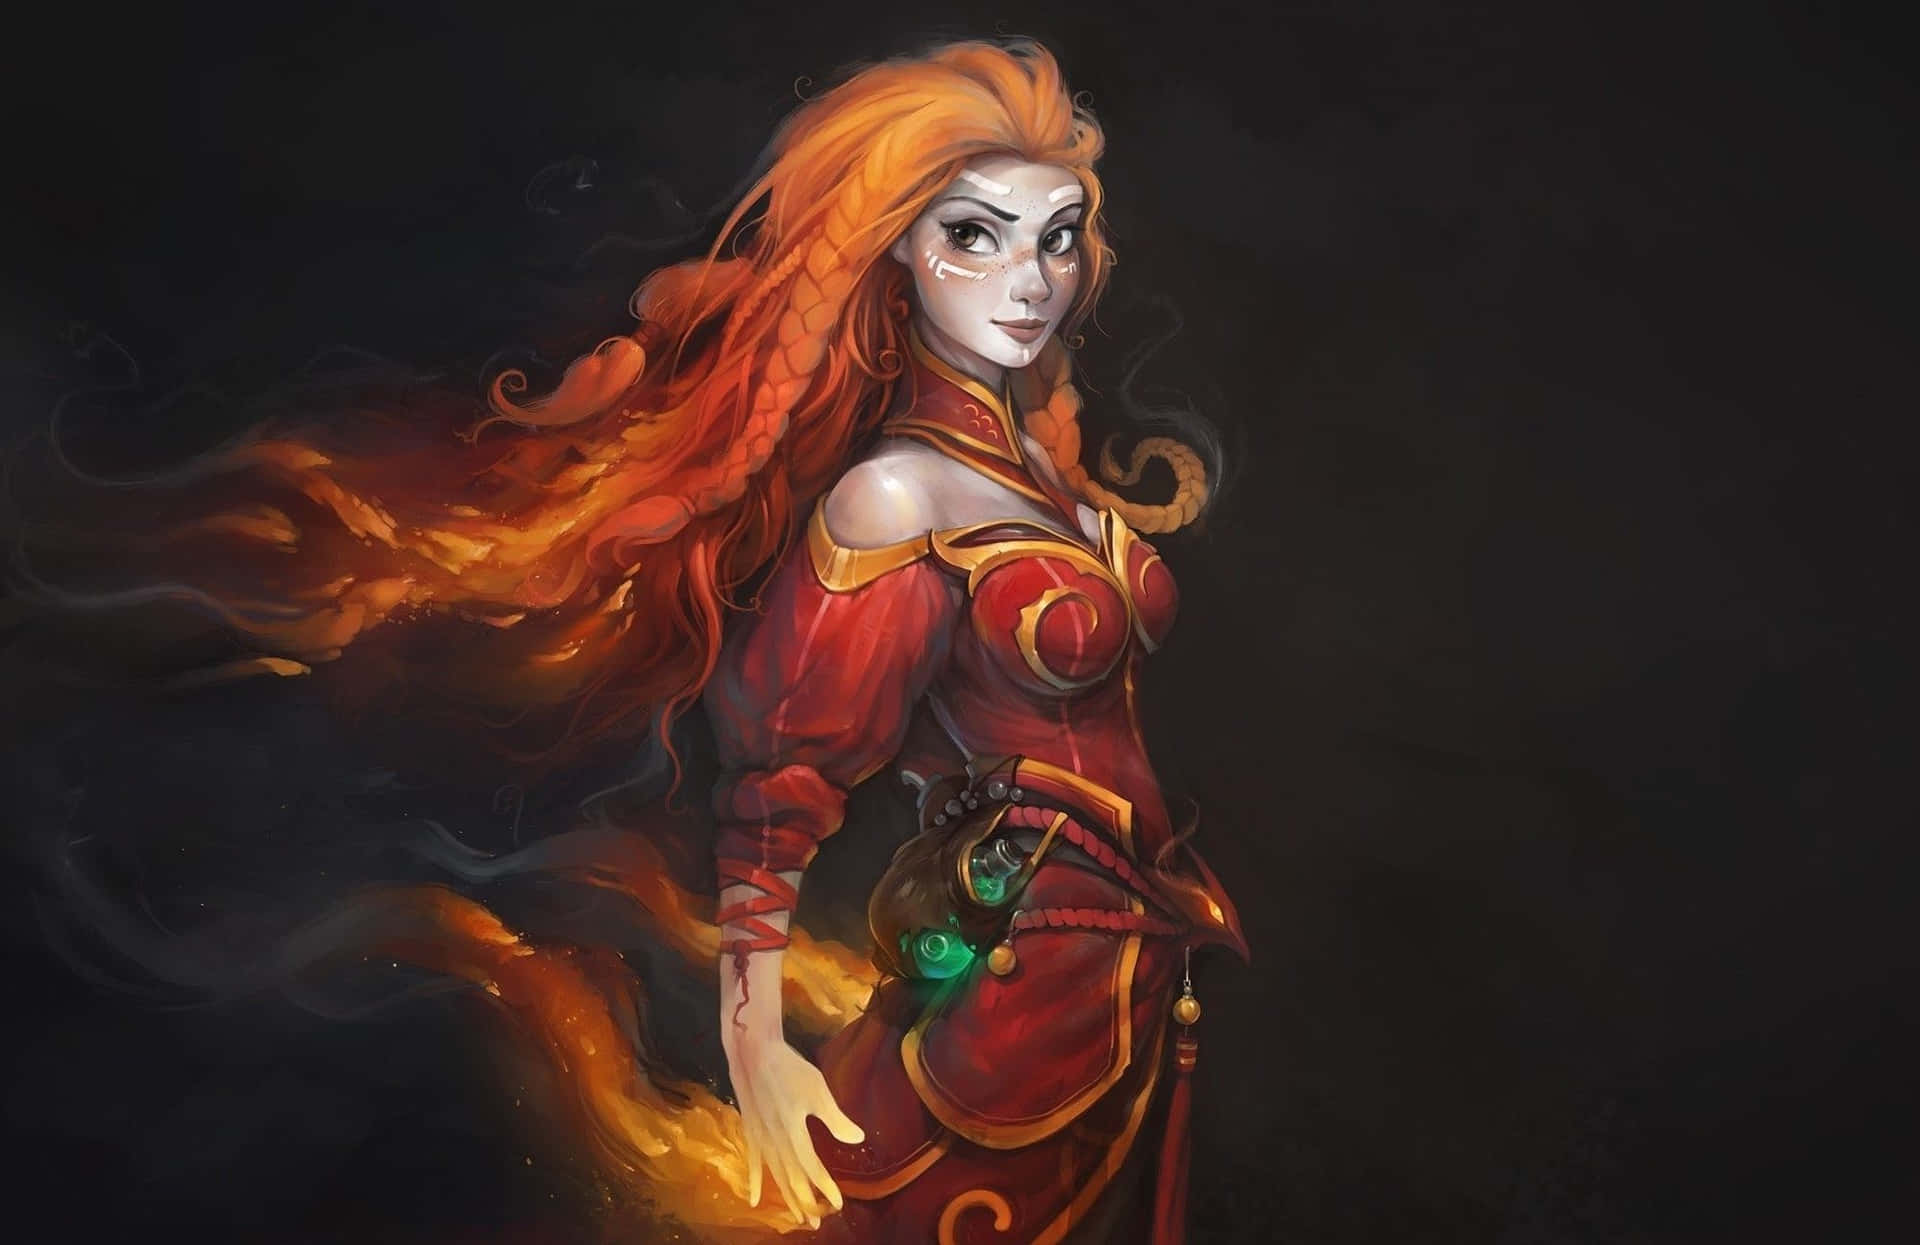 Fiery Lina, the Slayer unleashes her power in Dota 2 Wallpaper